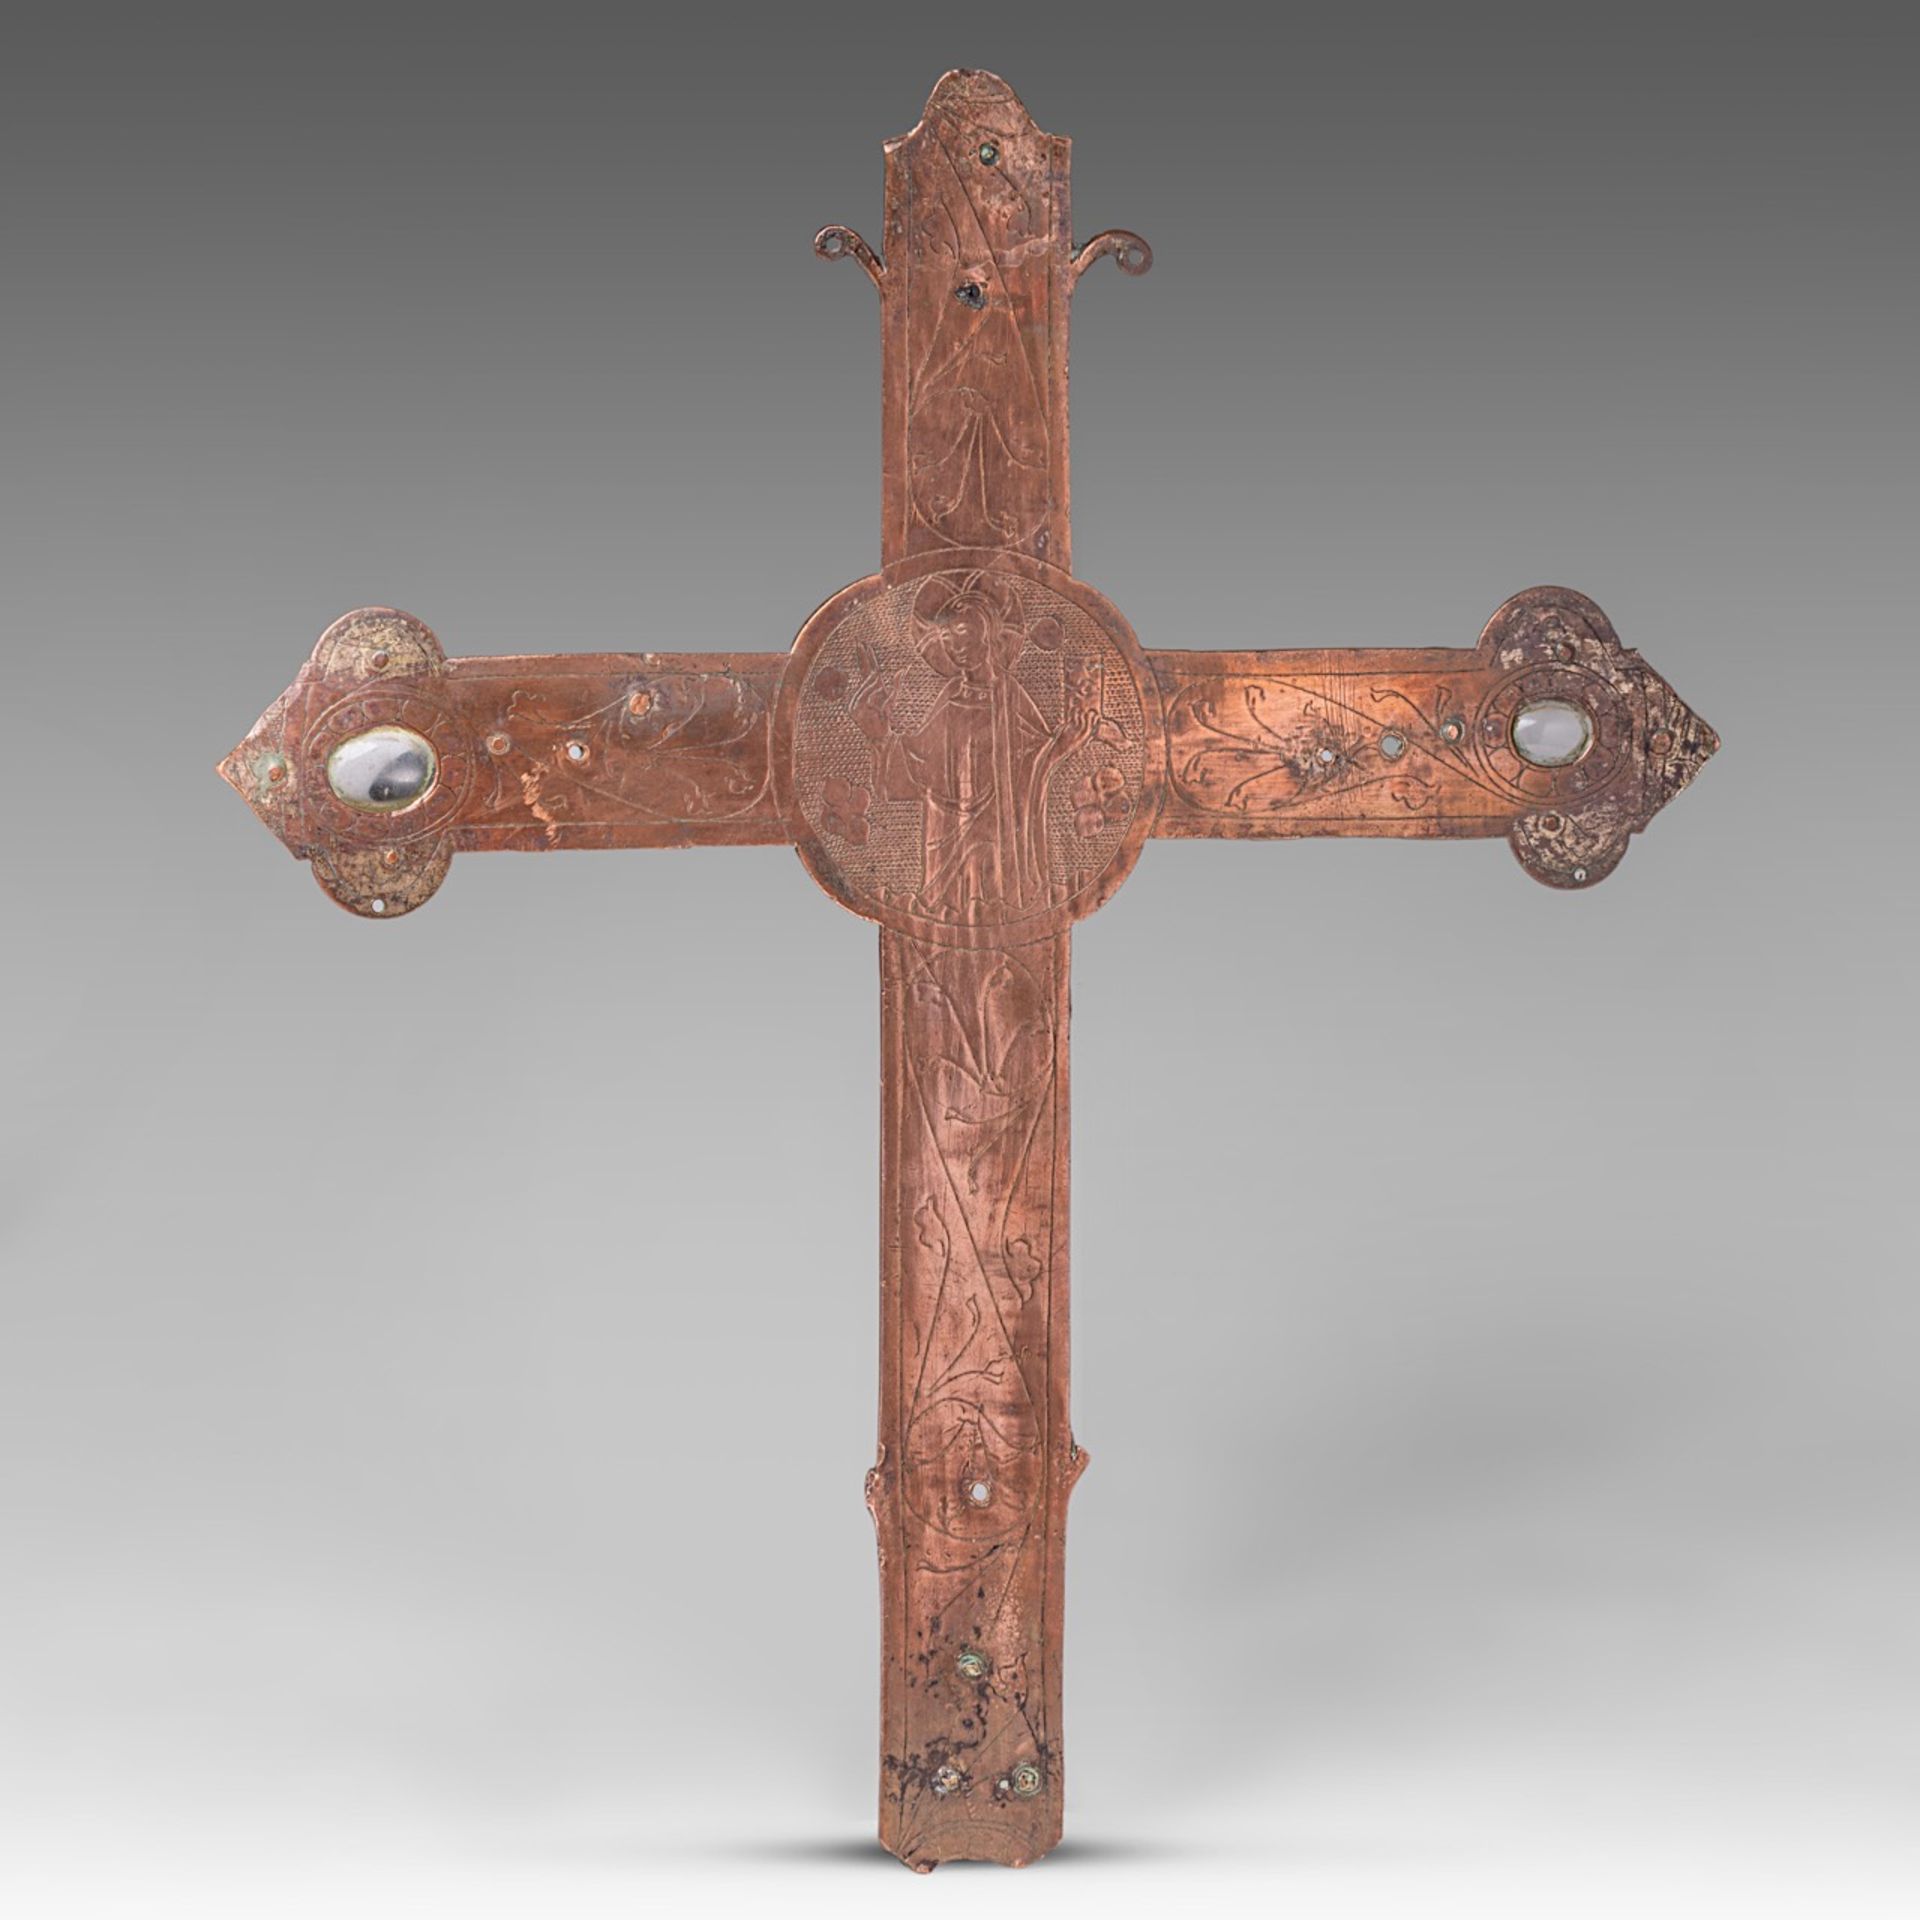 A 14thC copper engraved processional cross, with traces of gilt, H 35,5 cm - Image 3 of 5